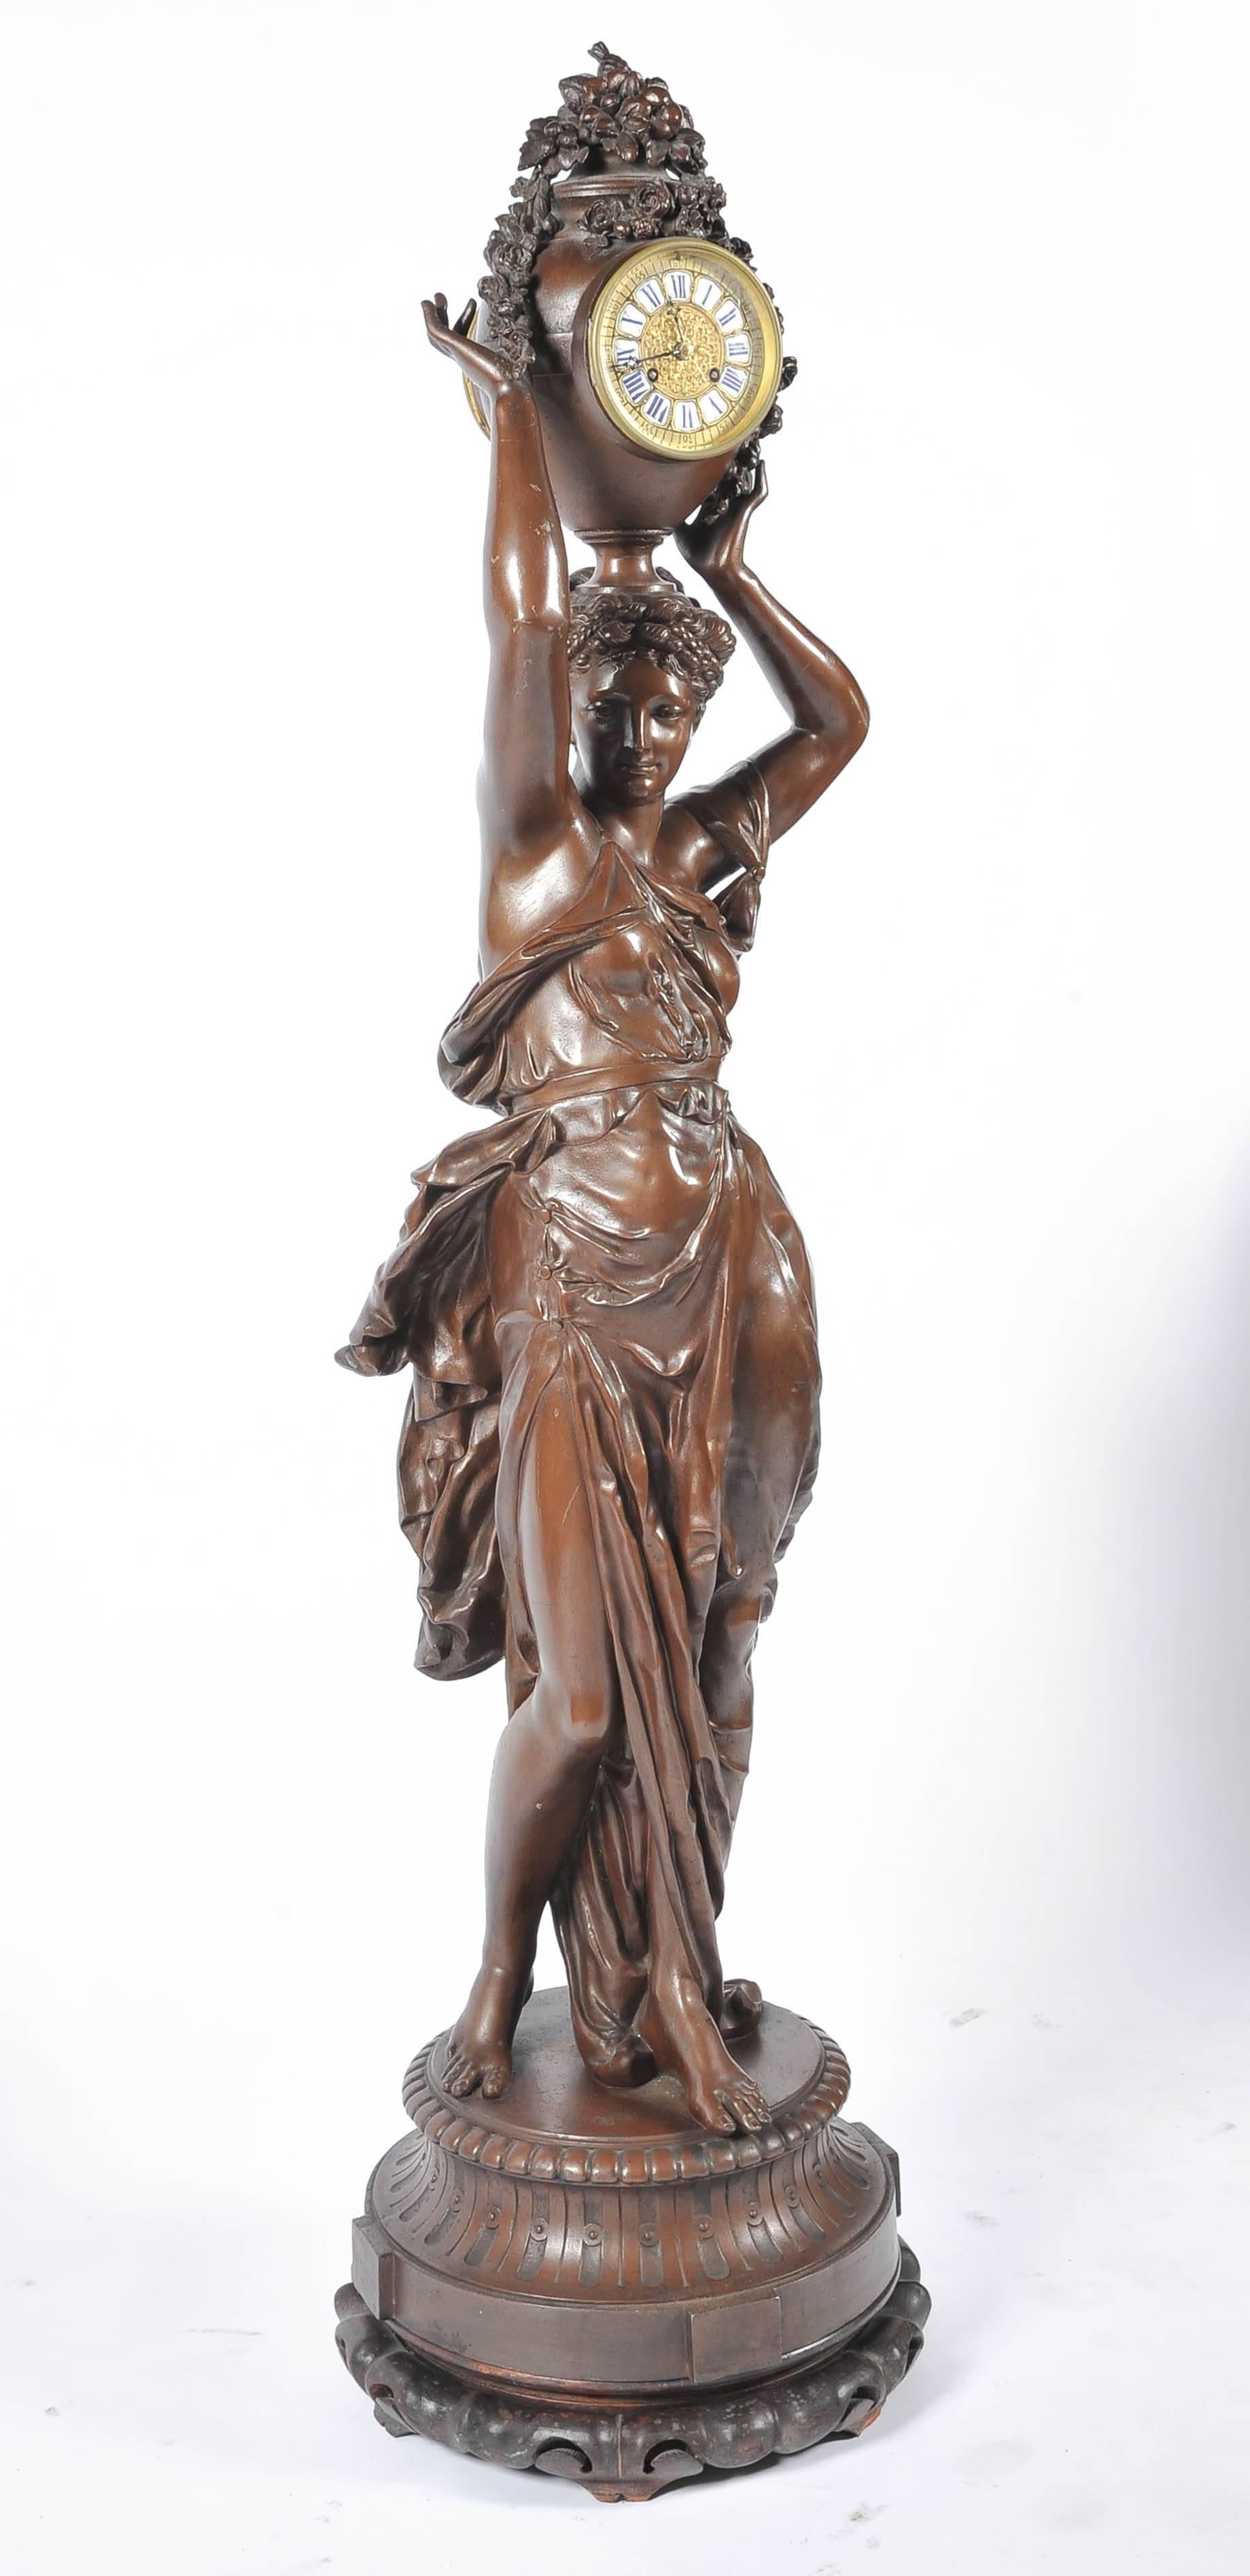 A very good quality French bronzed Spelter mystery clock, depicting a classically draped women carrying an urn with flowers and fruit. The eight day chiming clock set into the urn. 
Model by Albert-Ernest Carrier-Belleuse.